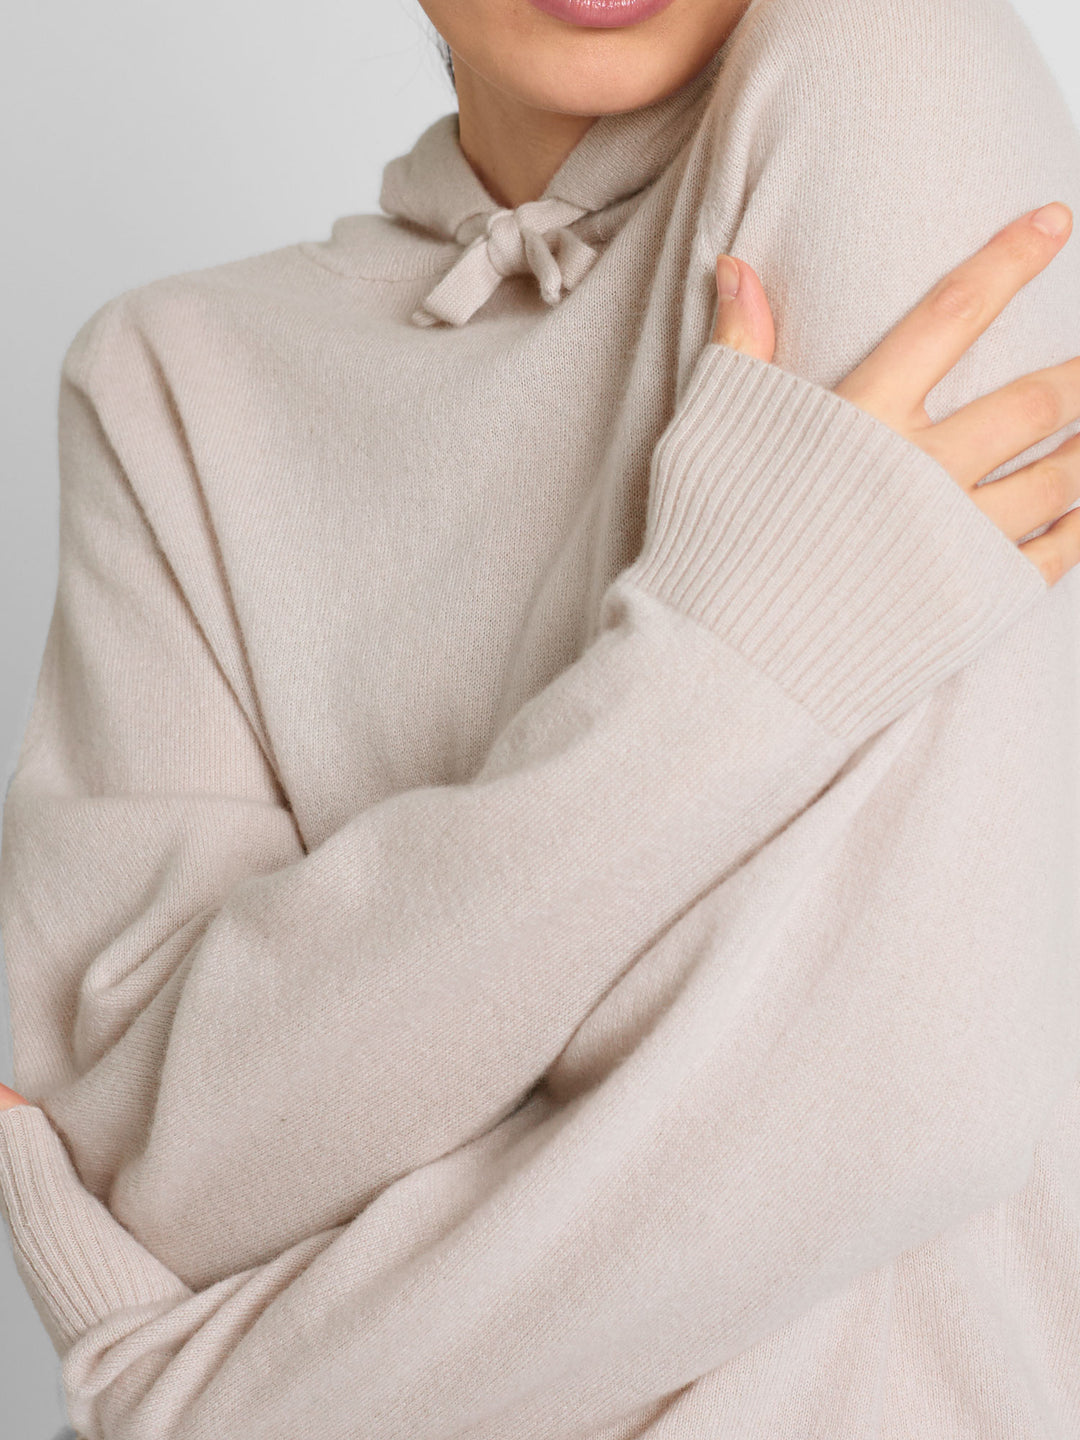 Cashmere hoodie "Lux Hoodie" in 100% pure cashmere. Scandinavian design by Kashmina. Color: Pearl.